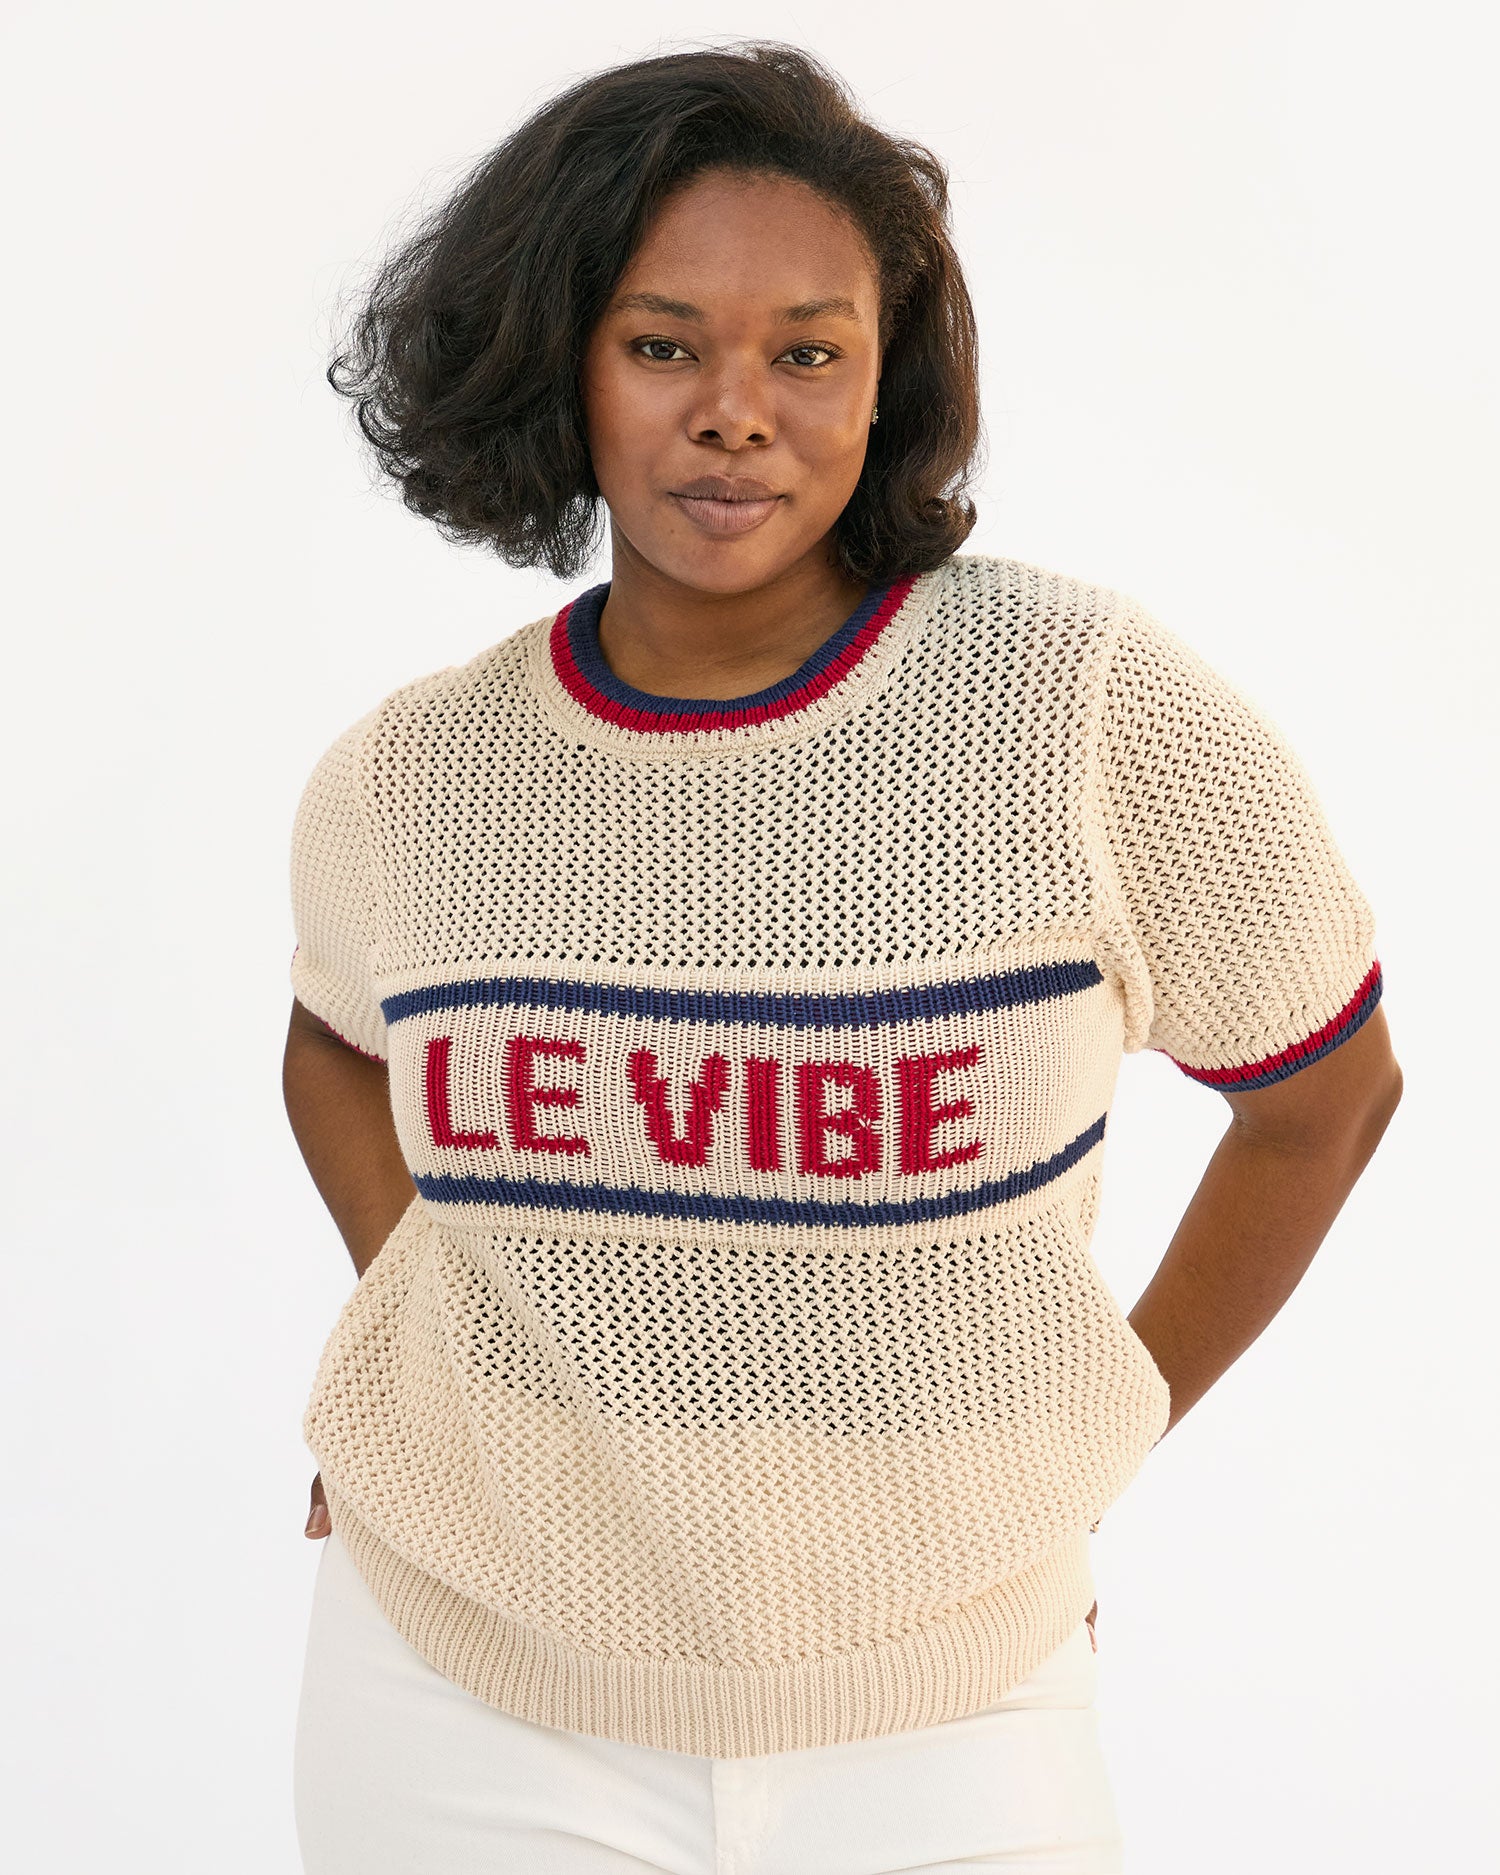 Luc Knit Tee on Candice